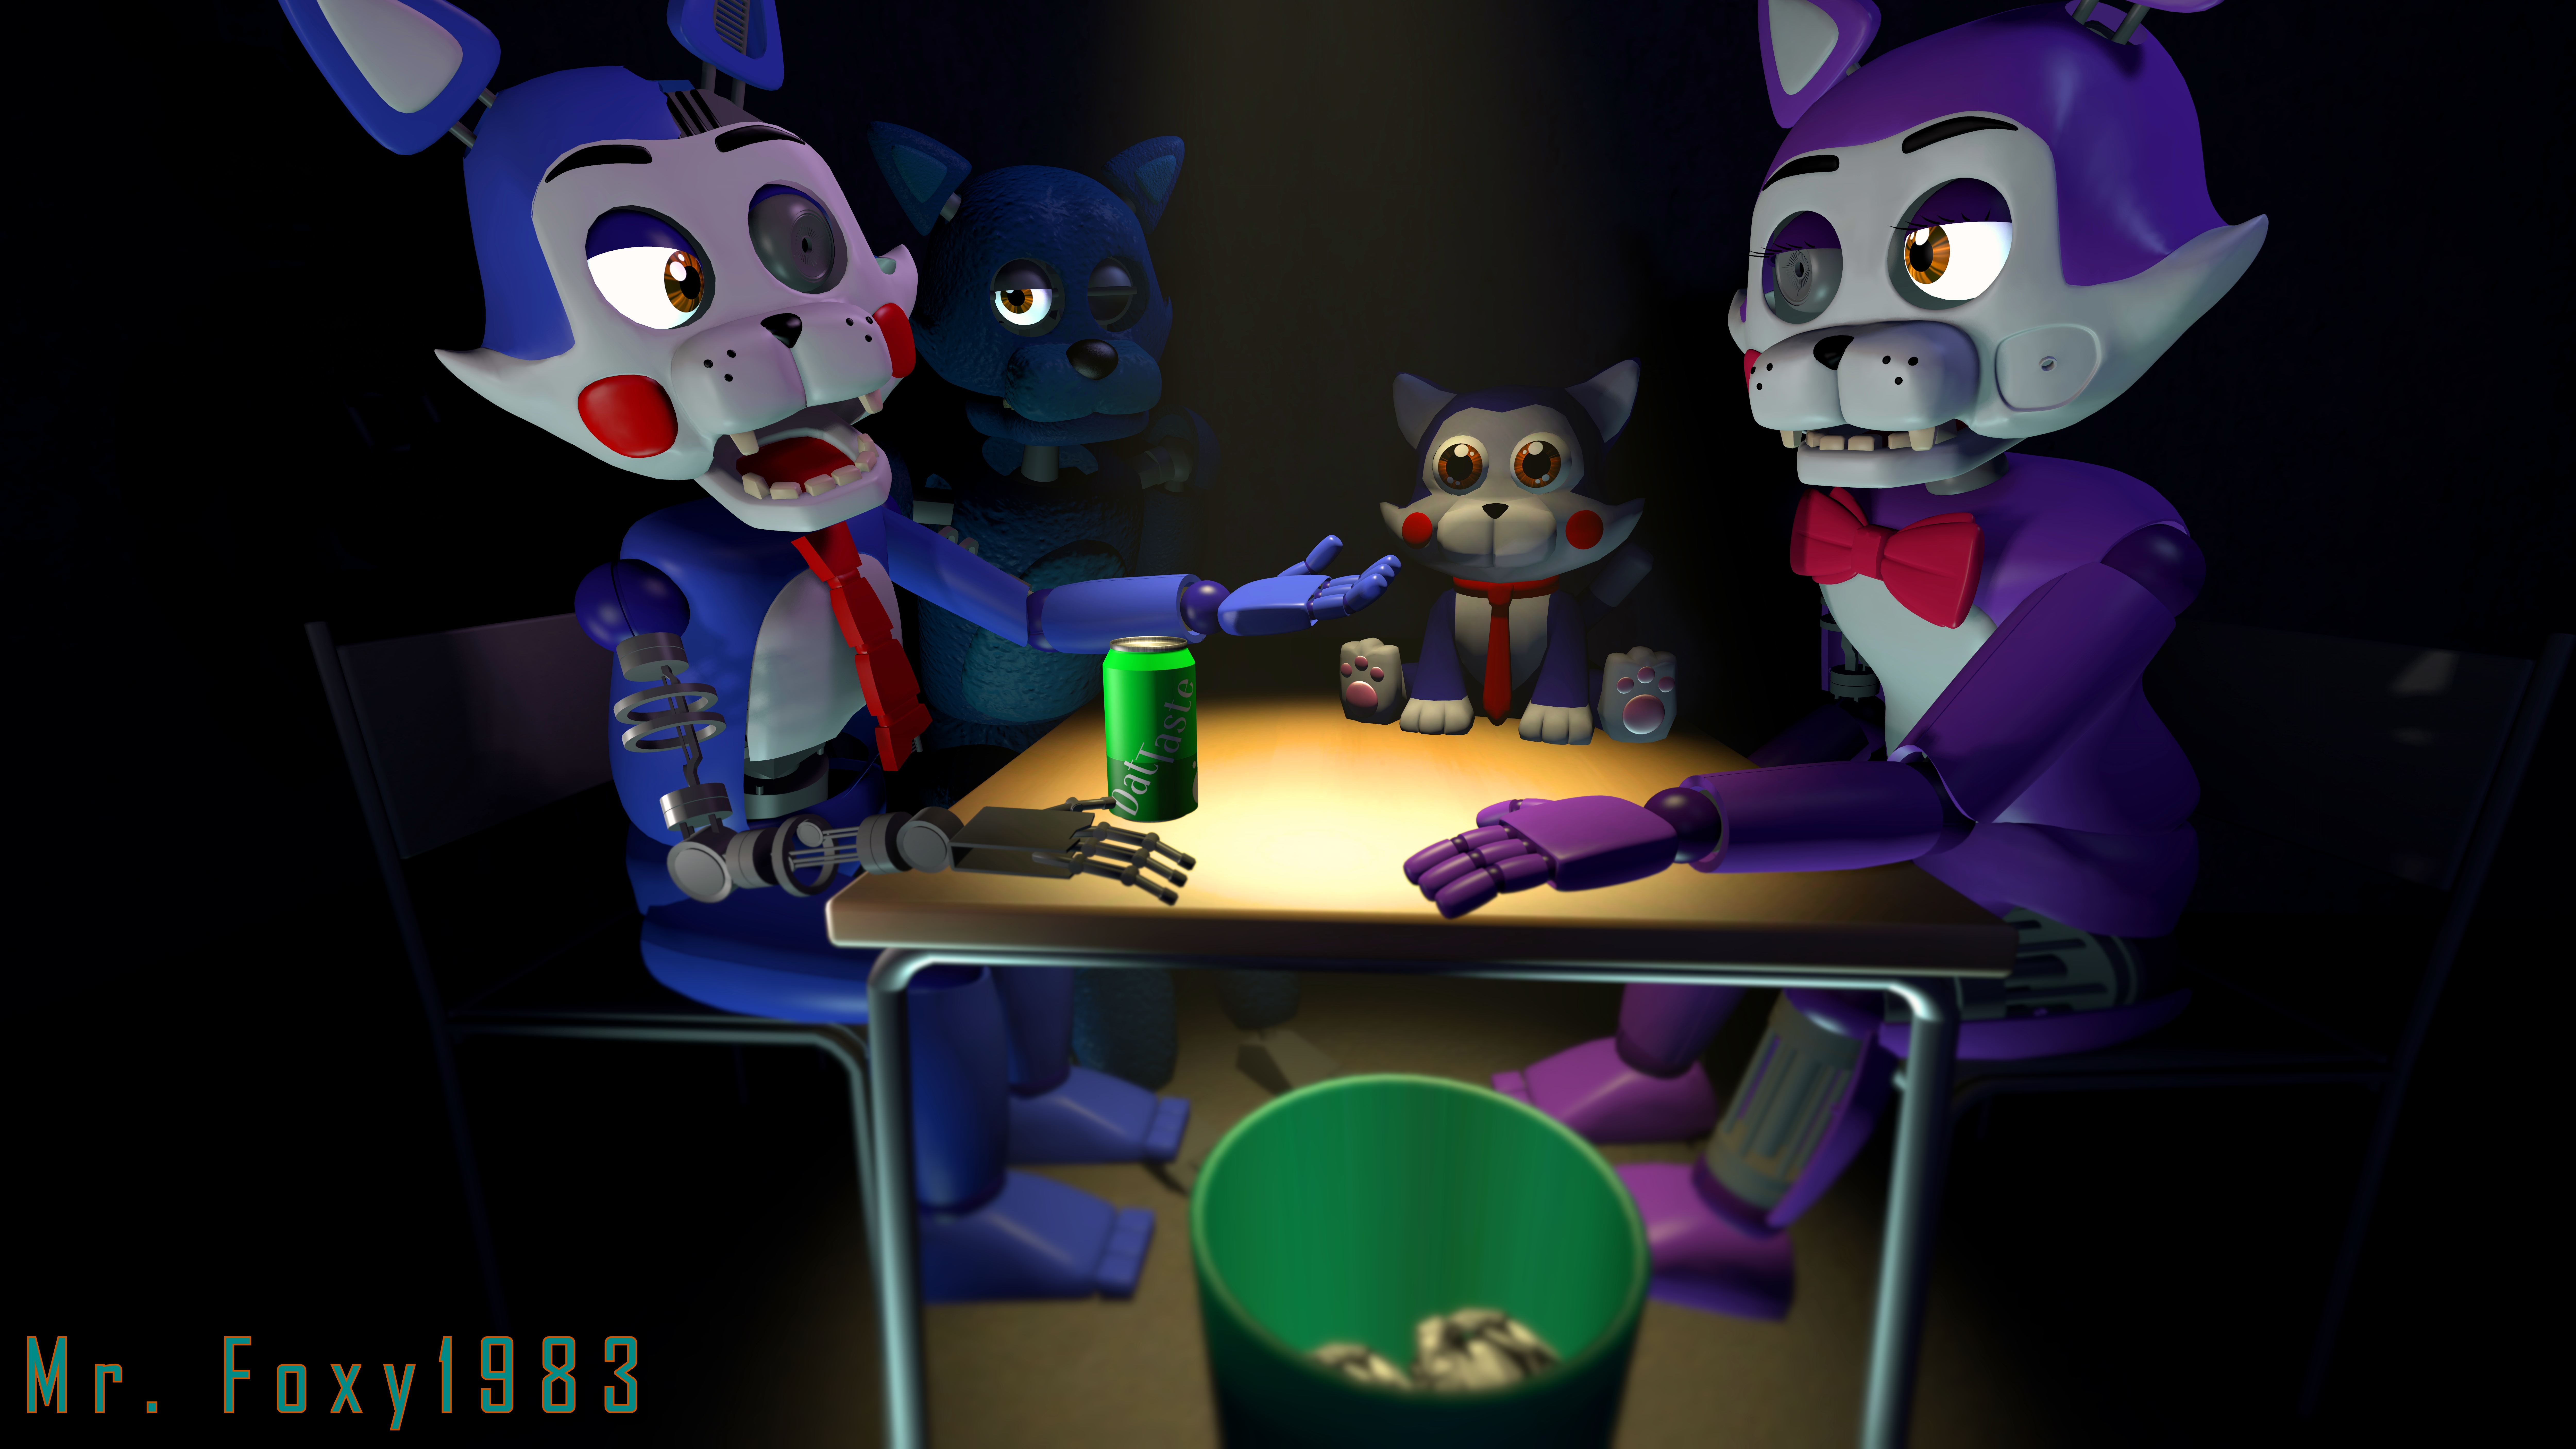  SFM FNAC  Poster  A Normal Day at the Factory by 